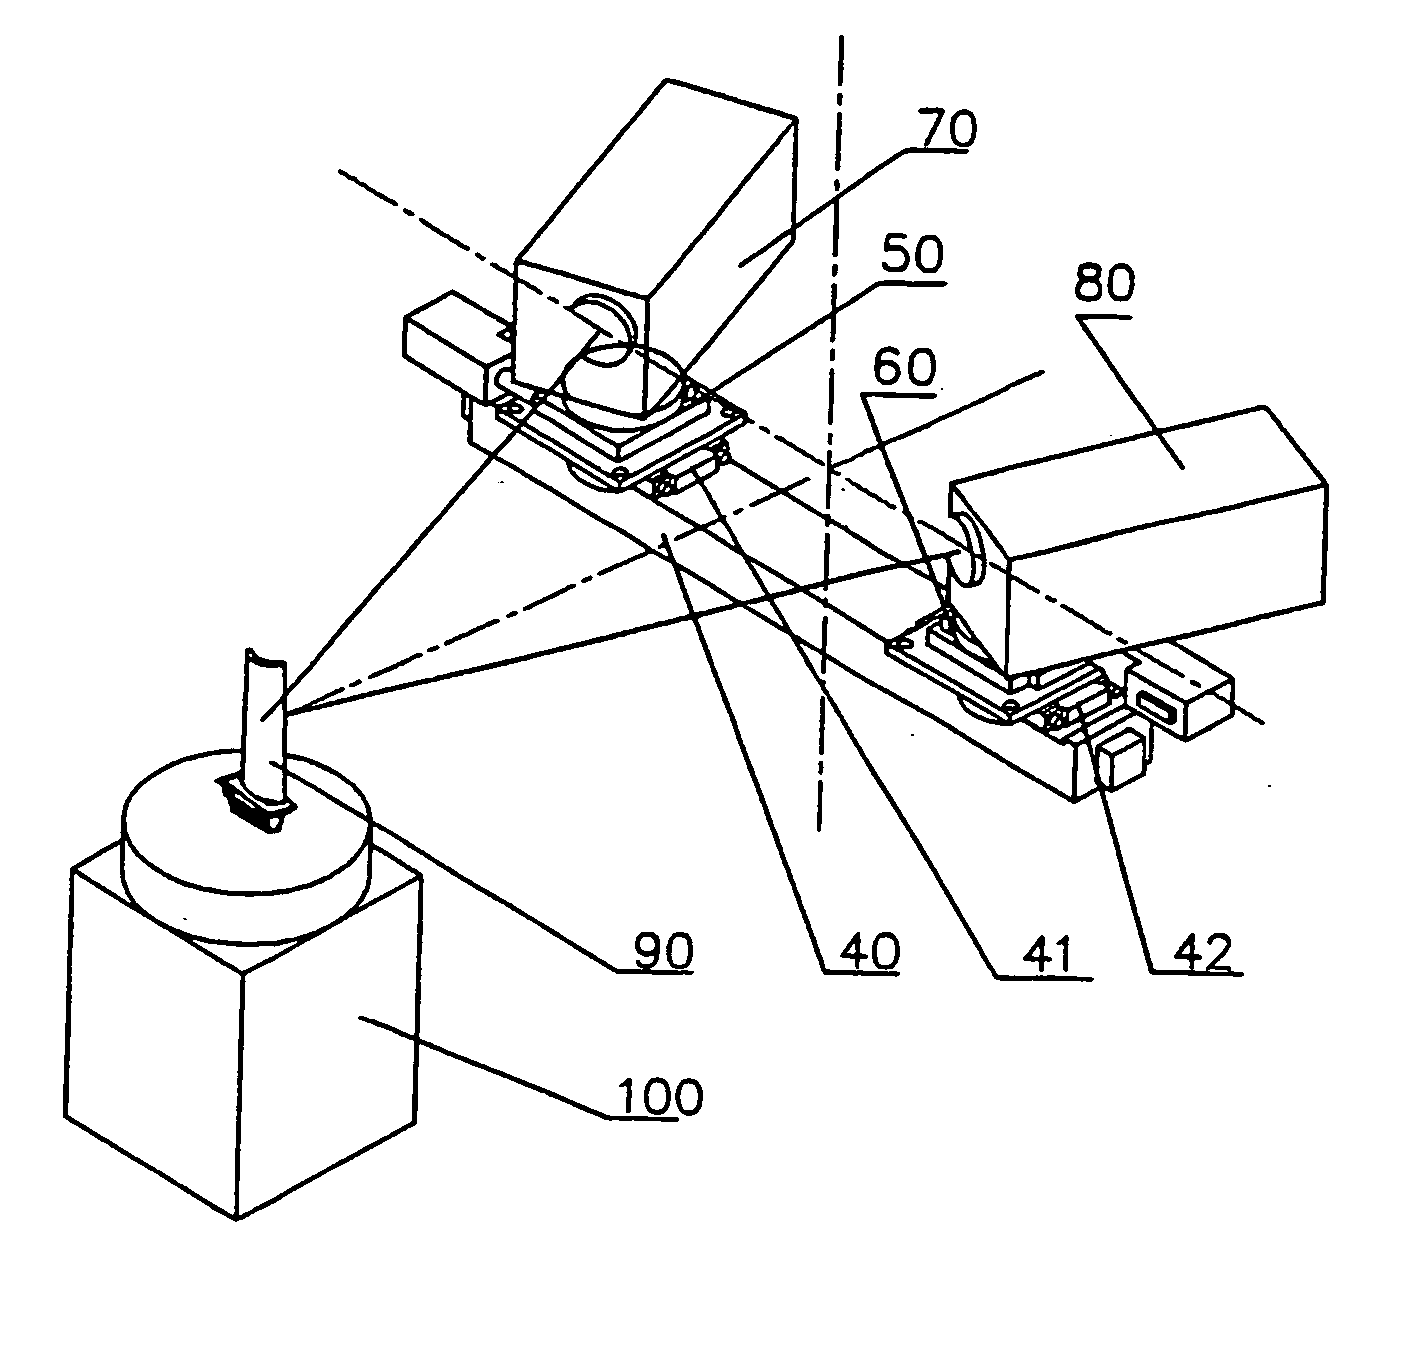 Sensing device for measuring the three-dimension shape and its measuring method